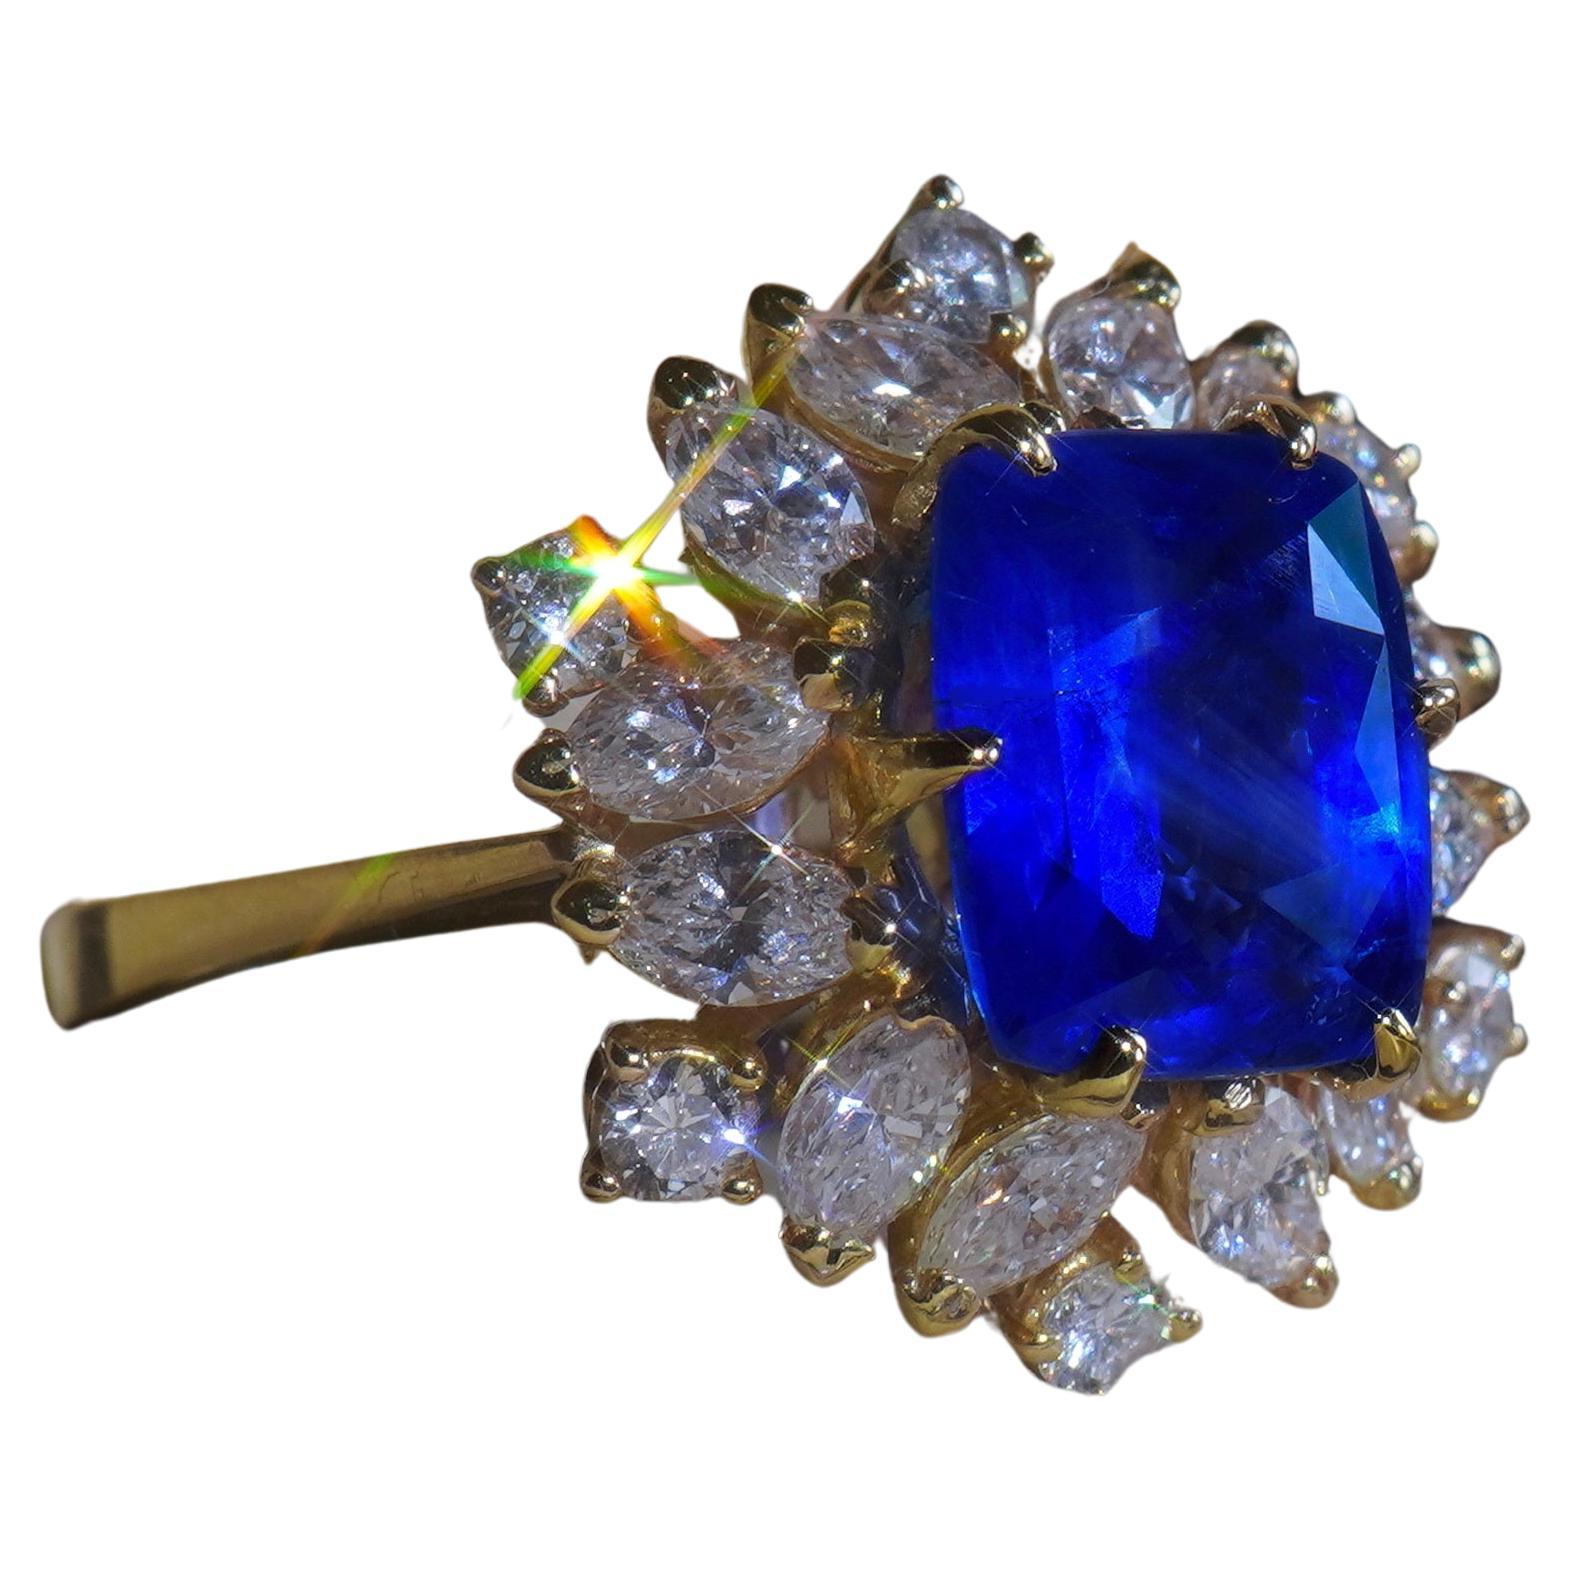 Old South Jewels proudly presents... VINTAGE LUXURY.   GIA CERTIFIED 9.19 CARAT UNHEATED BURMA SAPPHIRE 18K GOLD HUGE DIAMOND VINTAGE RING & BOX!   HUGE 6.31 CARAT BRILLIANT ROYAL BLUE GIA CERTIFIED RARE NO HEAT NATURAL SAPPHIRE.   This Gorgeous